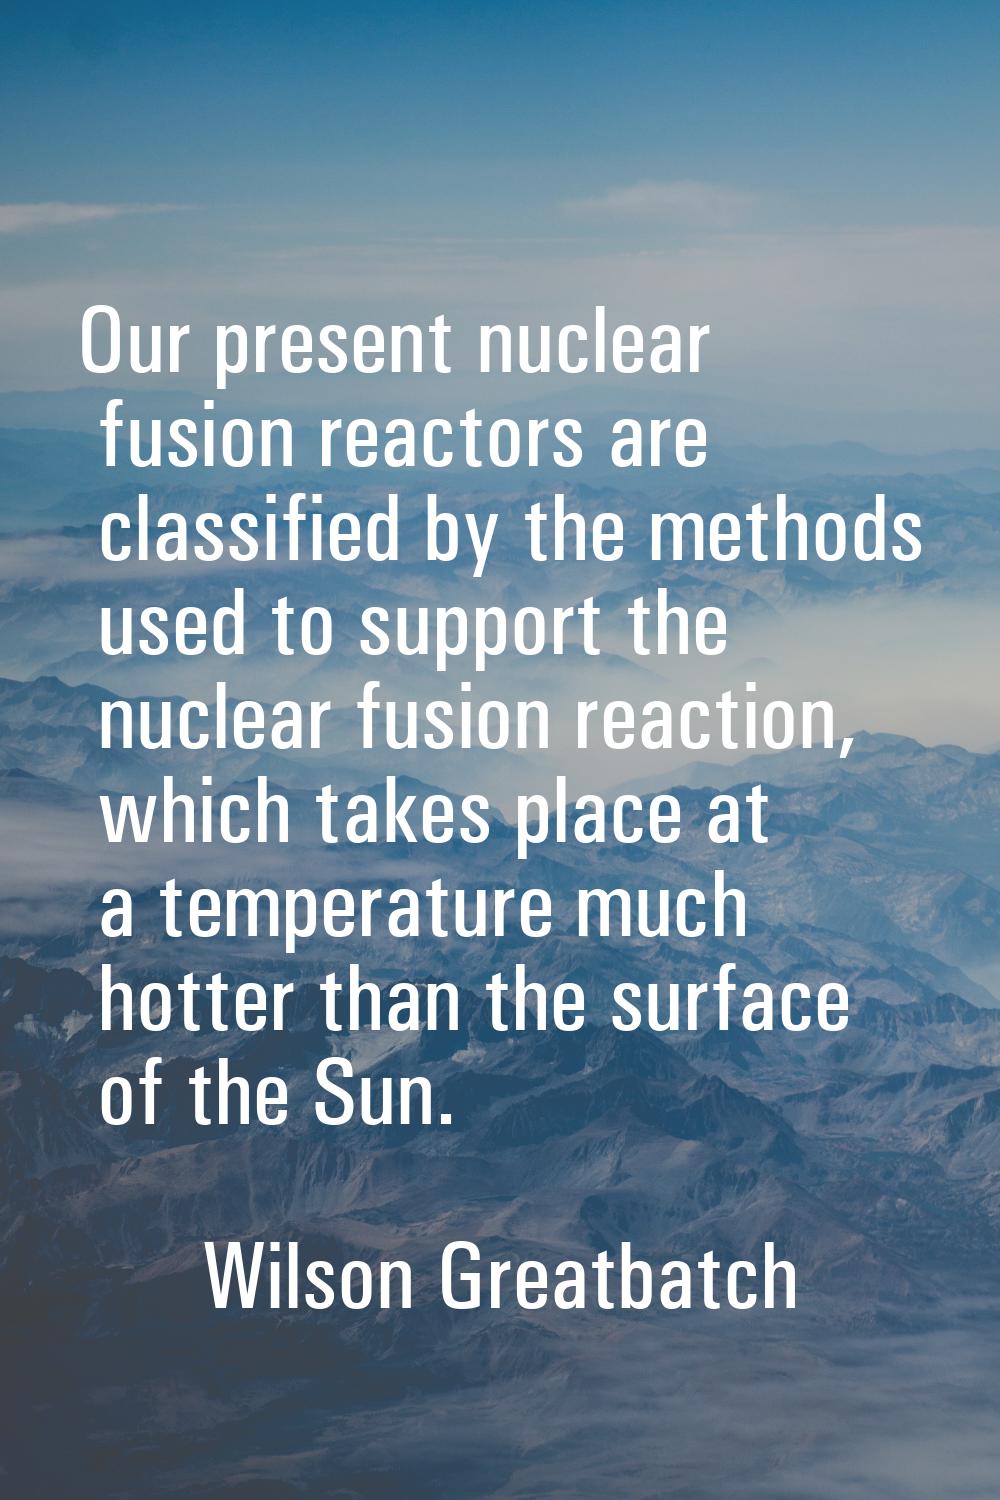 Our present nuclear fusion reactors are classified by the methods used to support the nuclear fusio